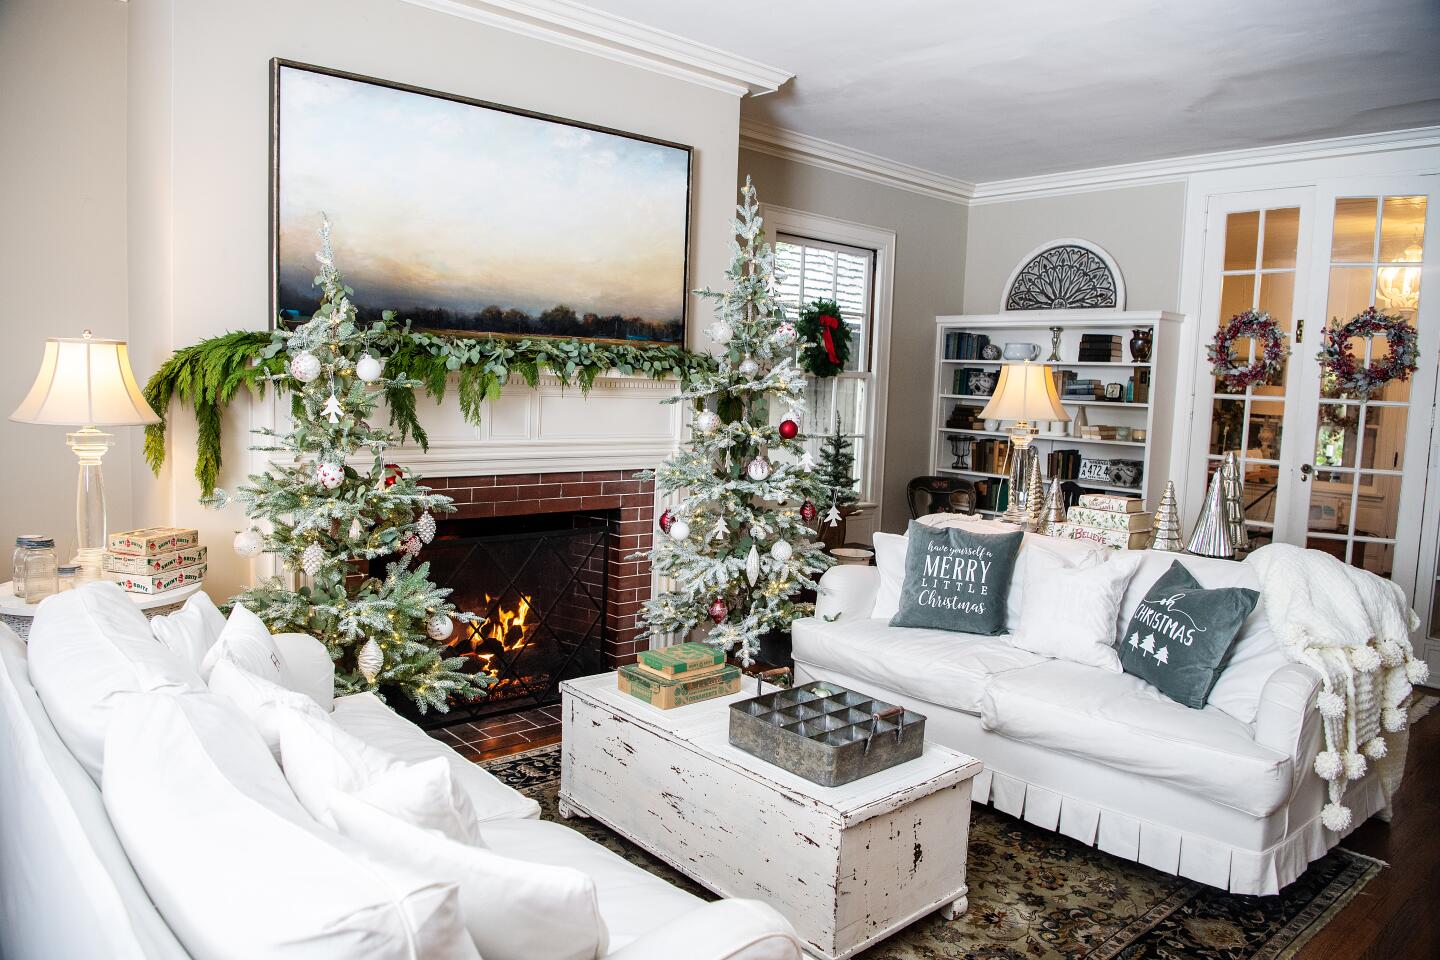 Every year, Saeta transforms her South Pasadena home in to a Winter Wonderland ... in October.